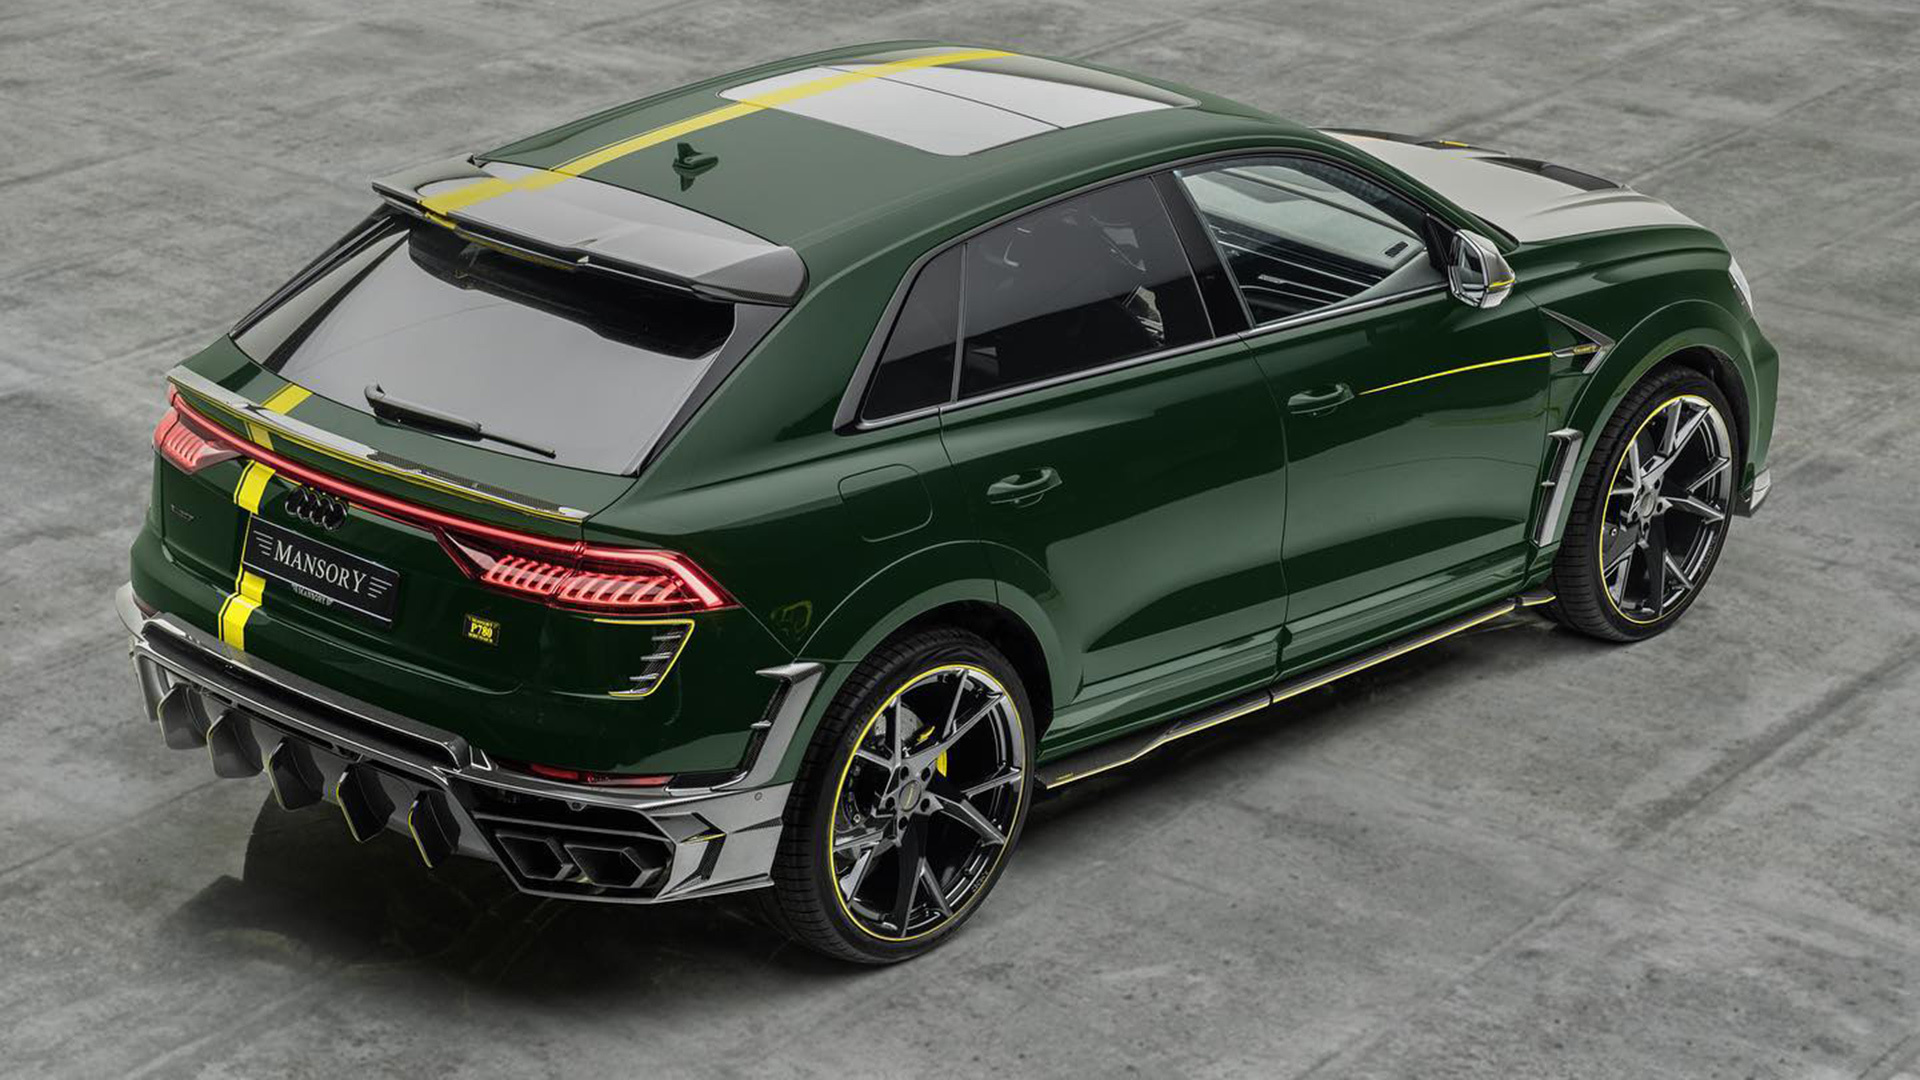 Mansory Baths Audi Rs Q8 In Green And Carbon Fiber Giving It 769 Hp